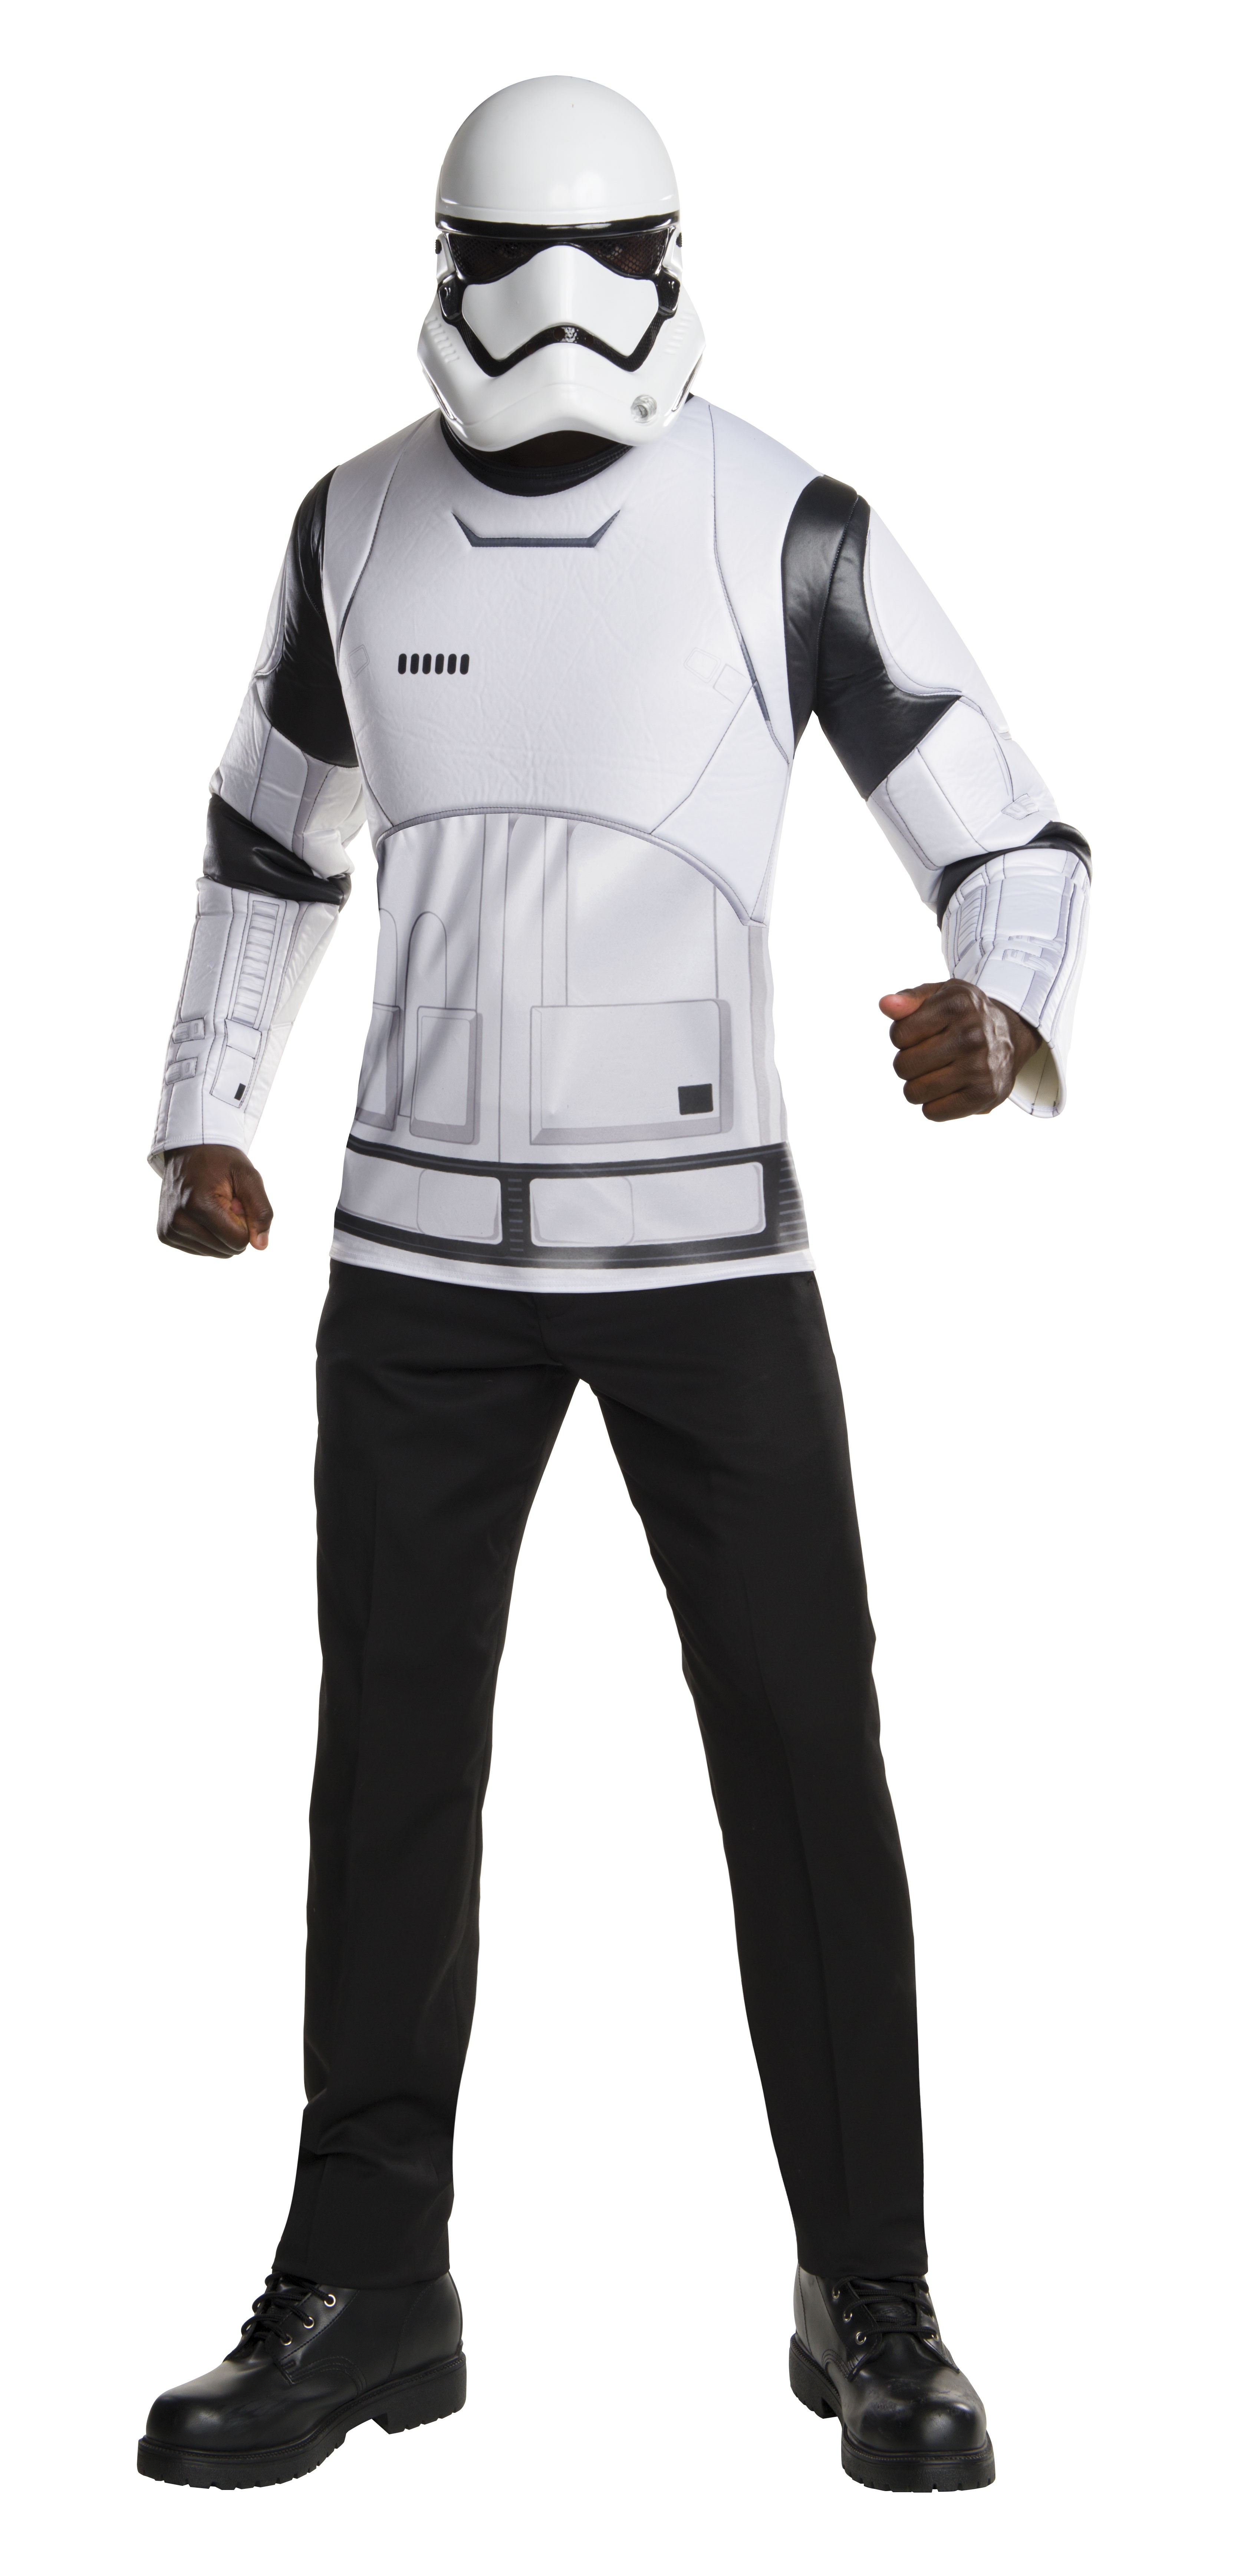 Star Wars Force Awakens Stormtrooper Adult Costume Kit Size STD, XL - Click Image to Close